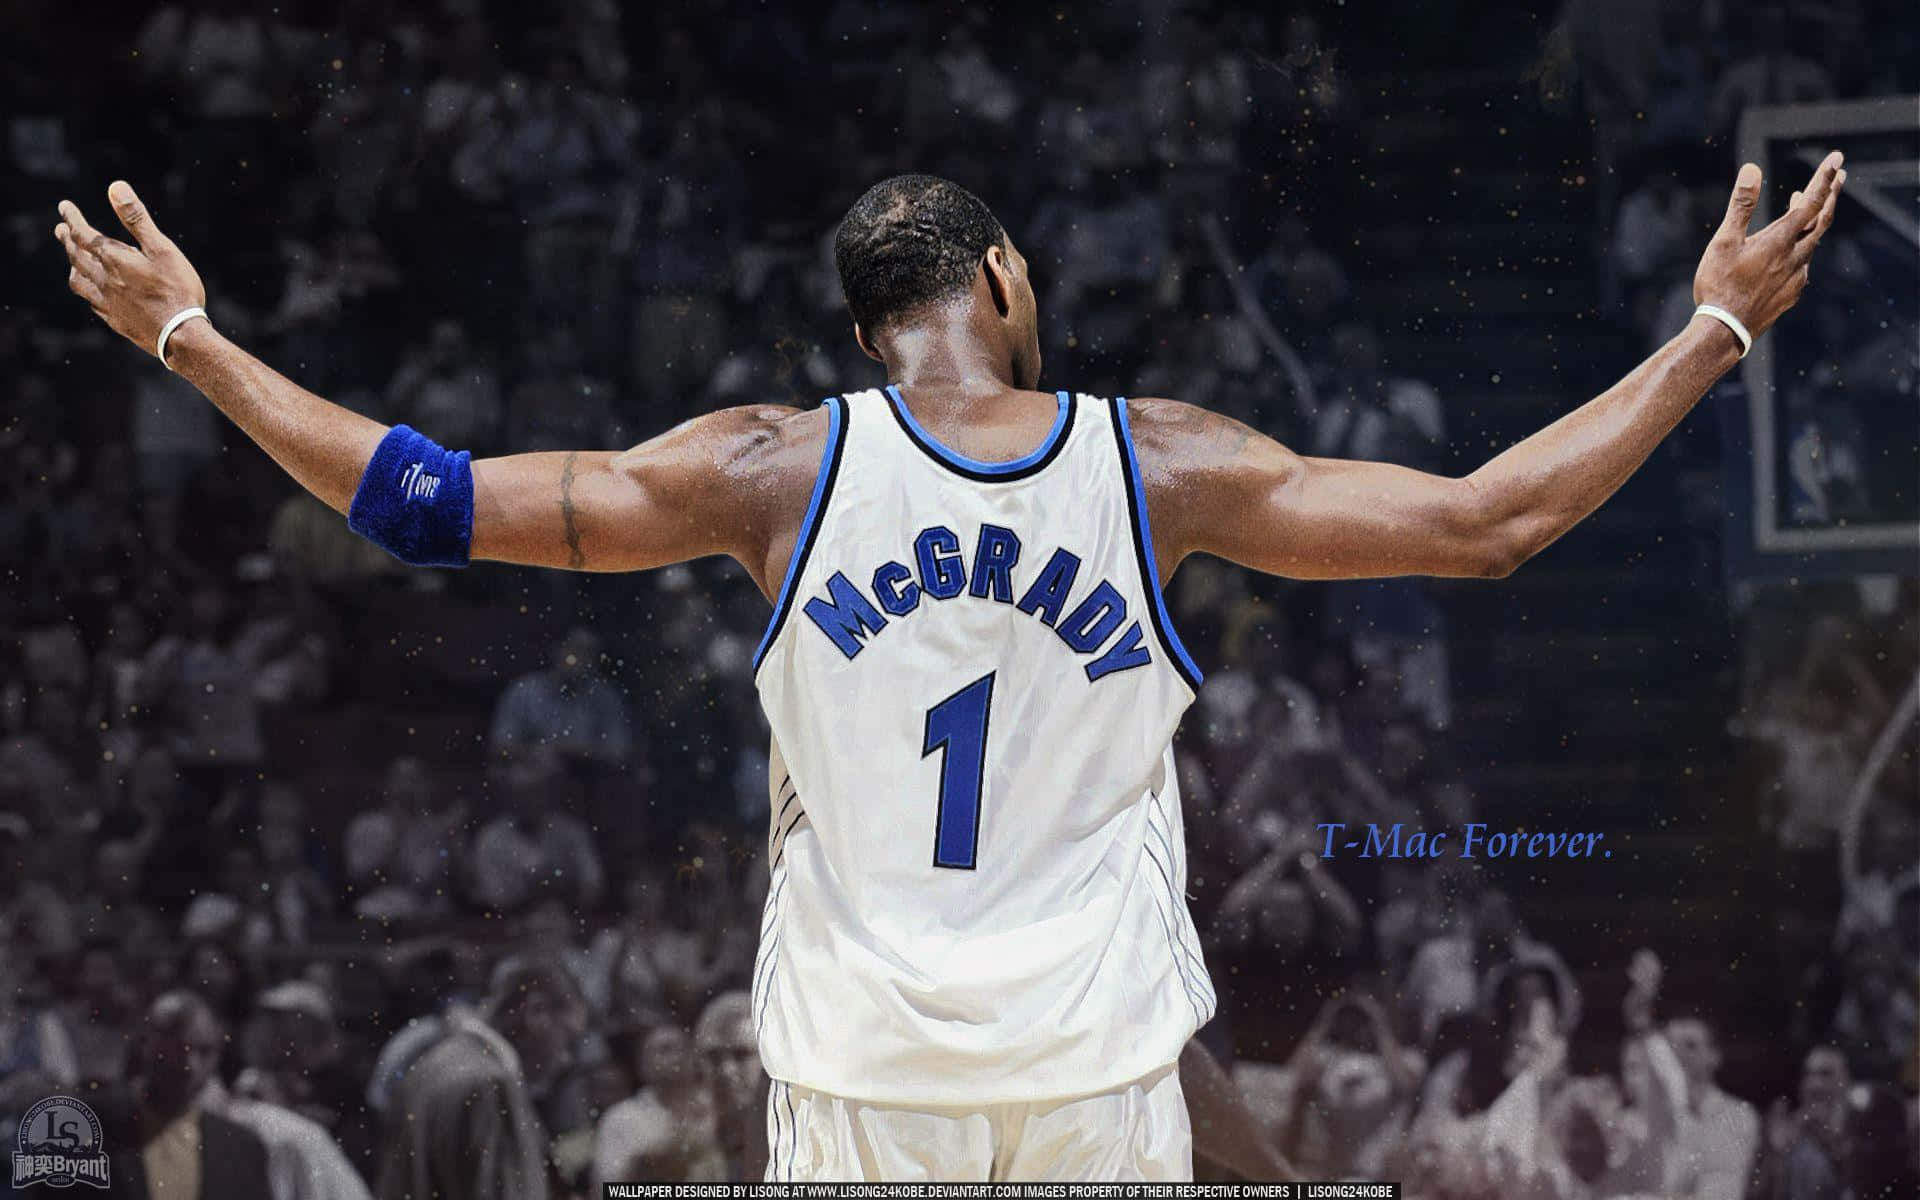 Download Tracy Mcgrady wallpapers for mobile phone, free Tracy Mcgrady  HD pictures